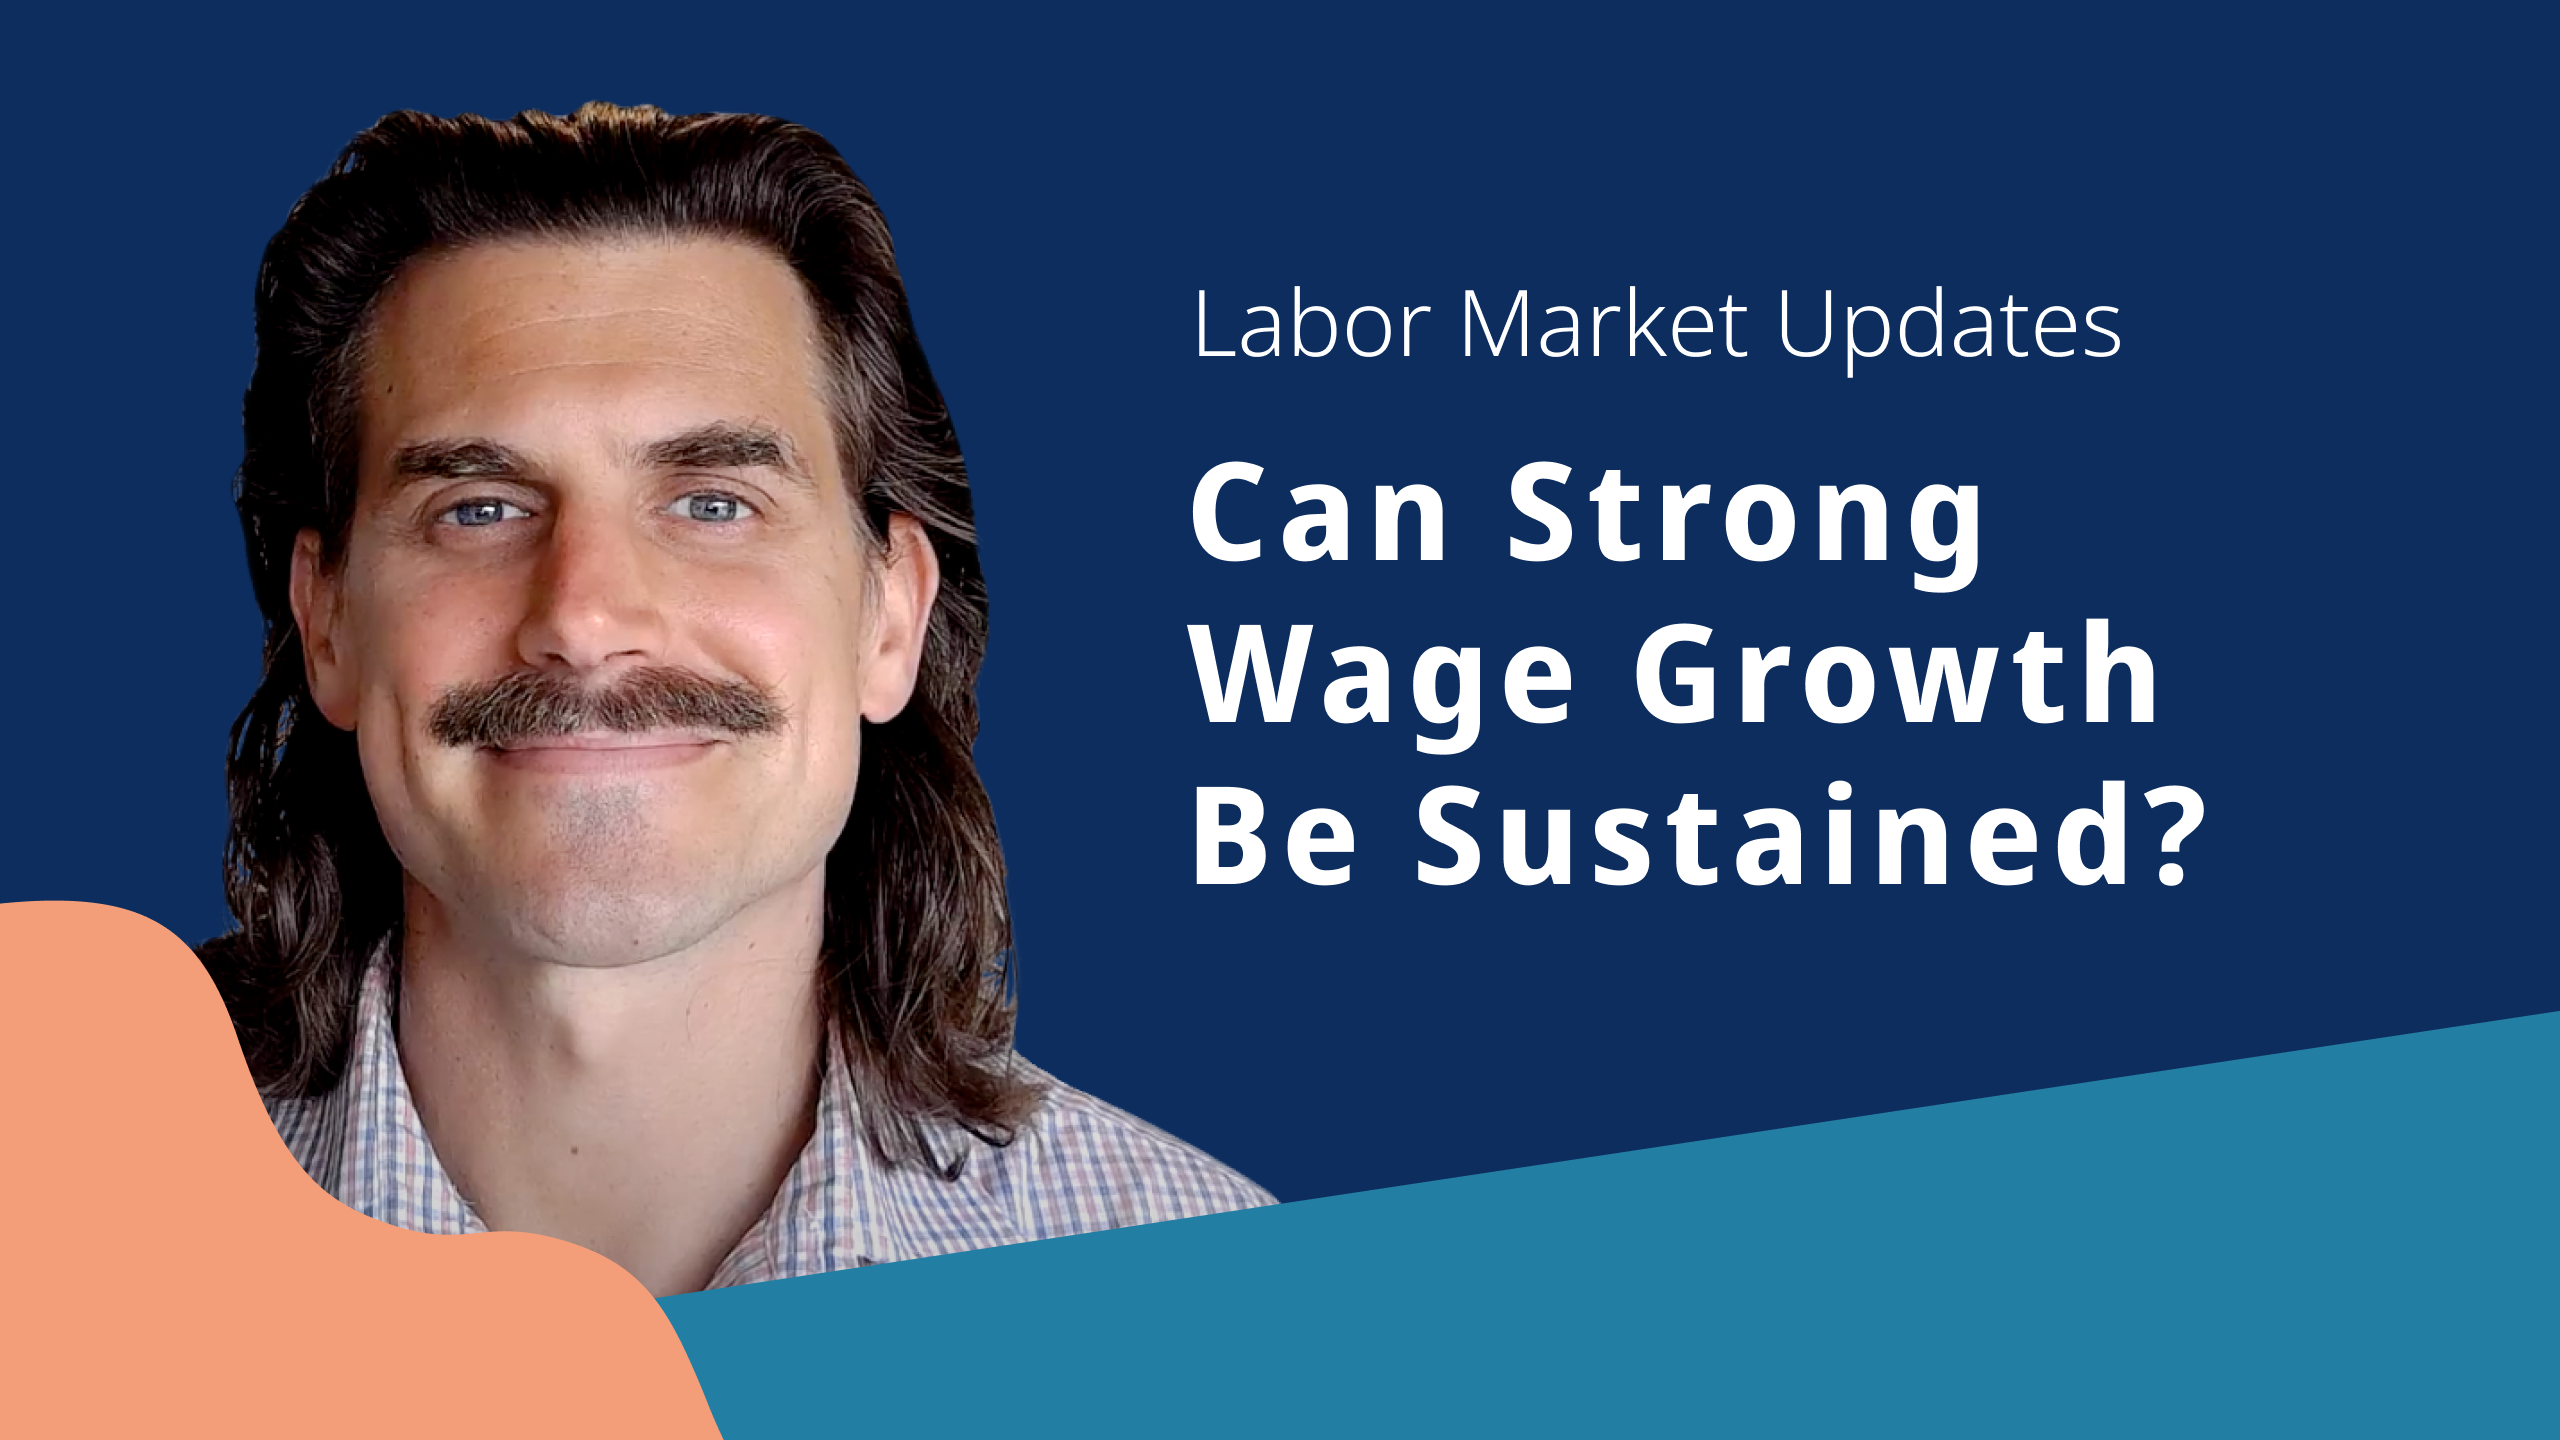 Thumbnail of Indeed Economist Daniel Culbertson with the text "Labor Market Update: Can Strong Wage Growth Be Sustained?"